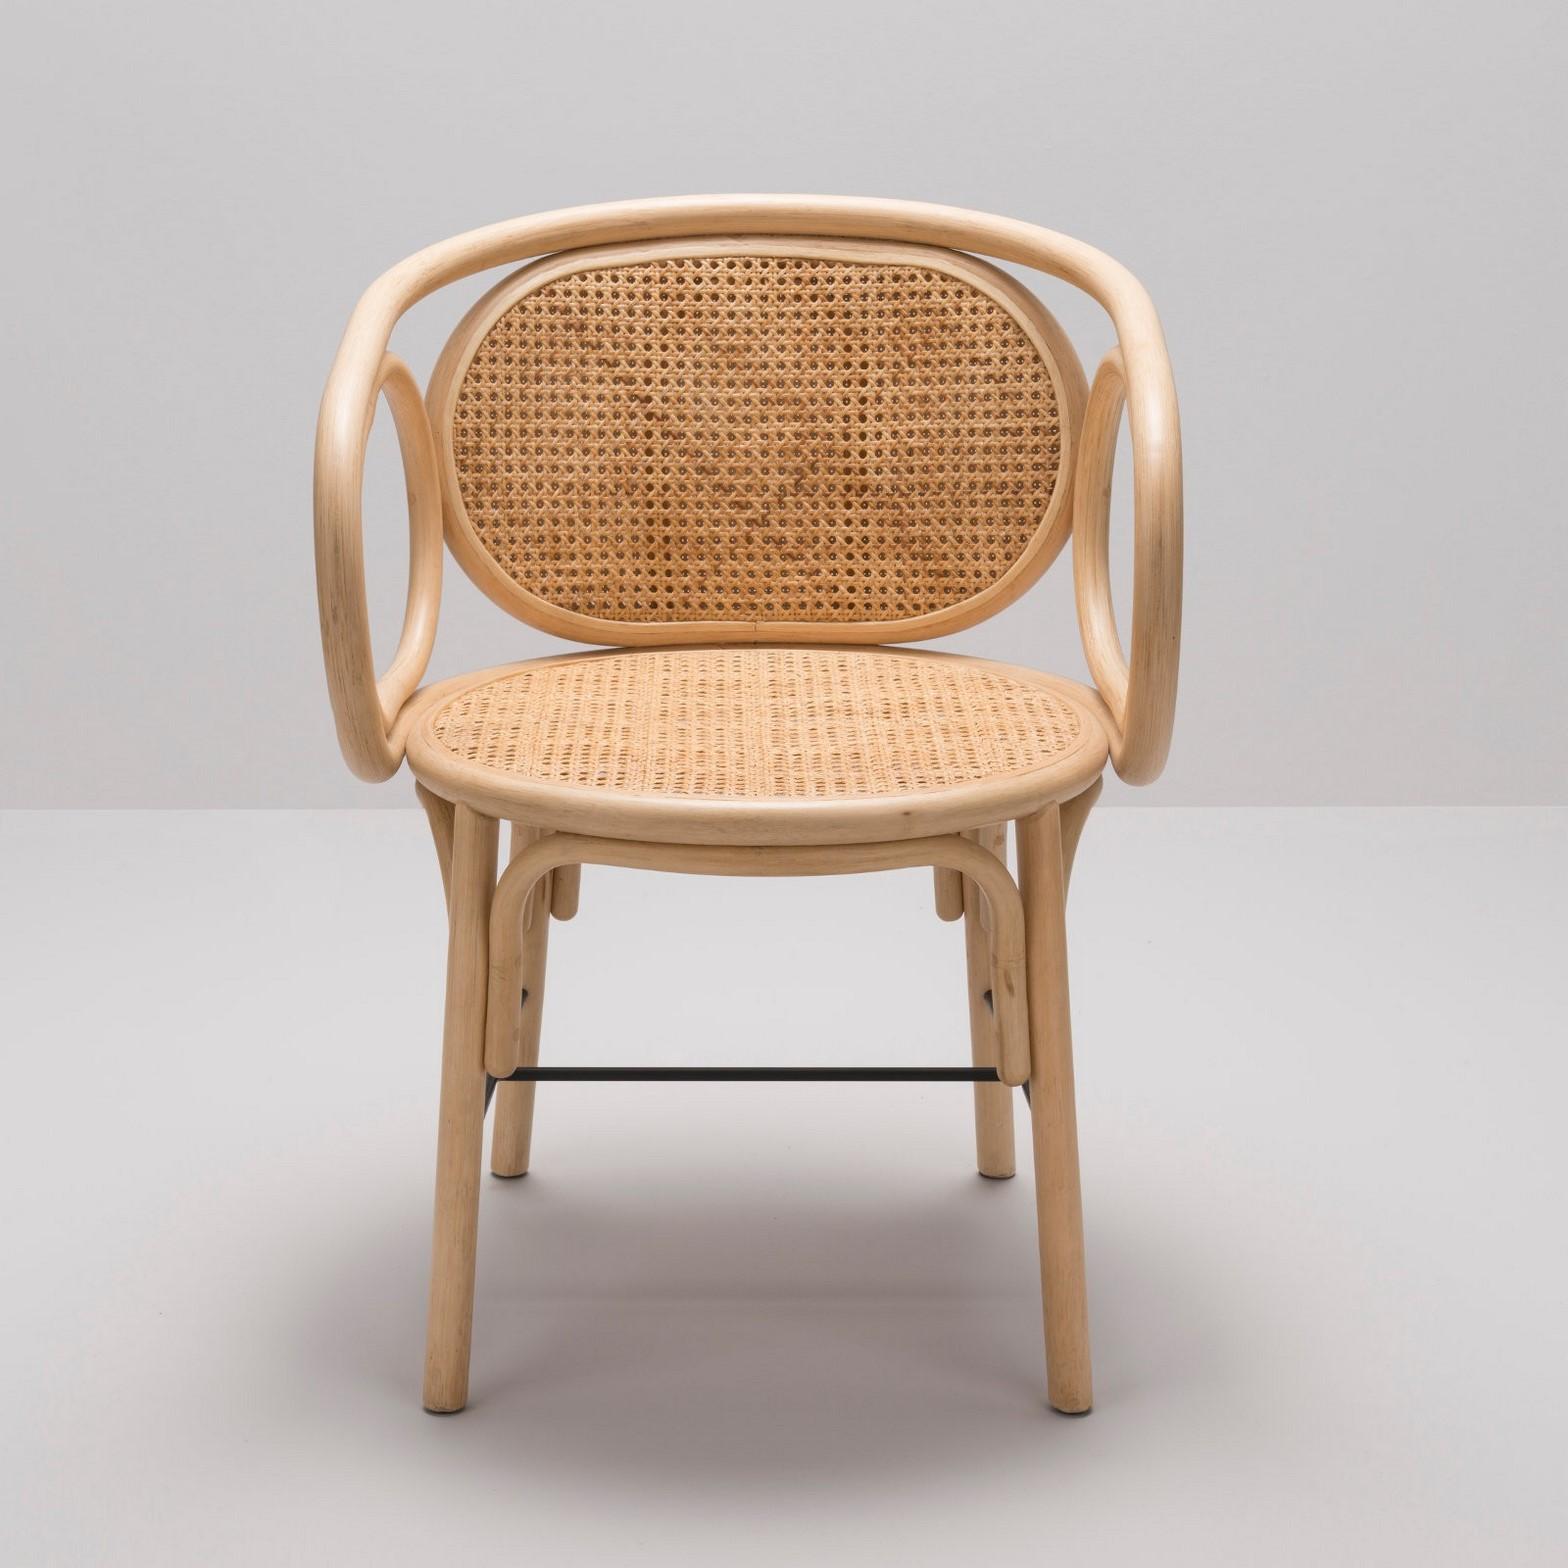 curved rattan chair